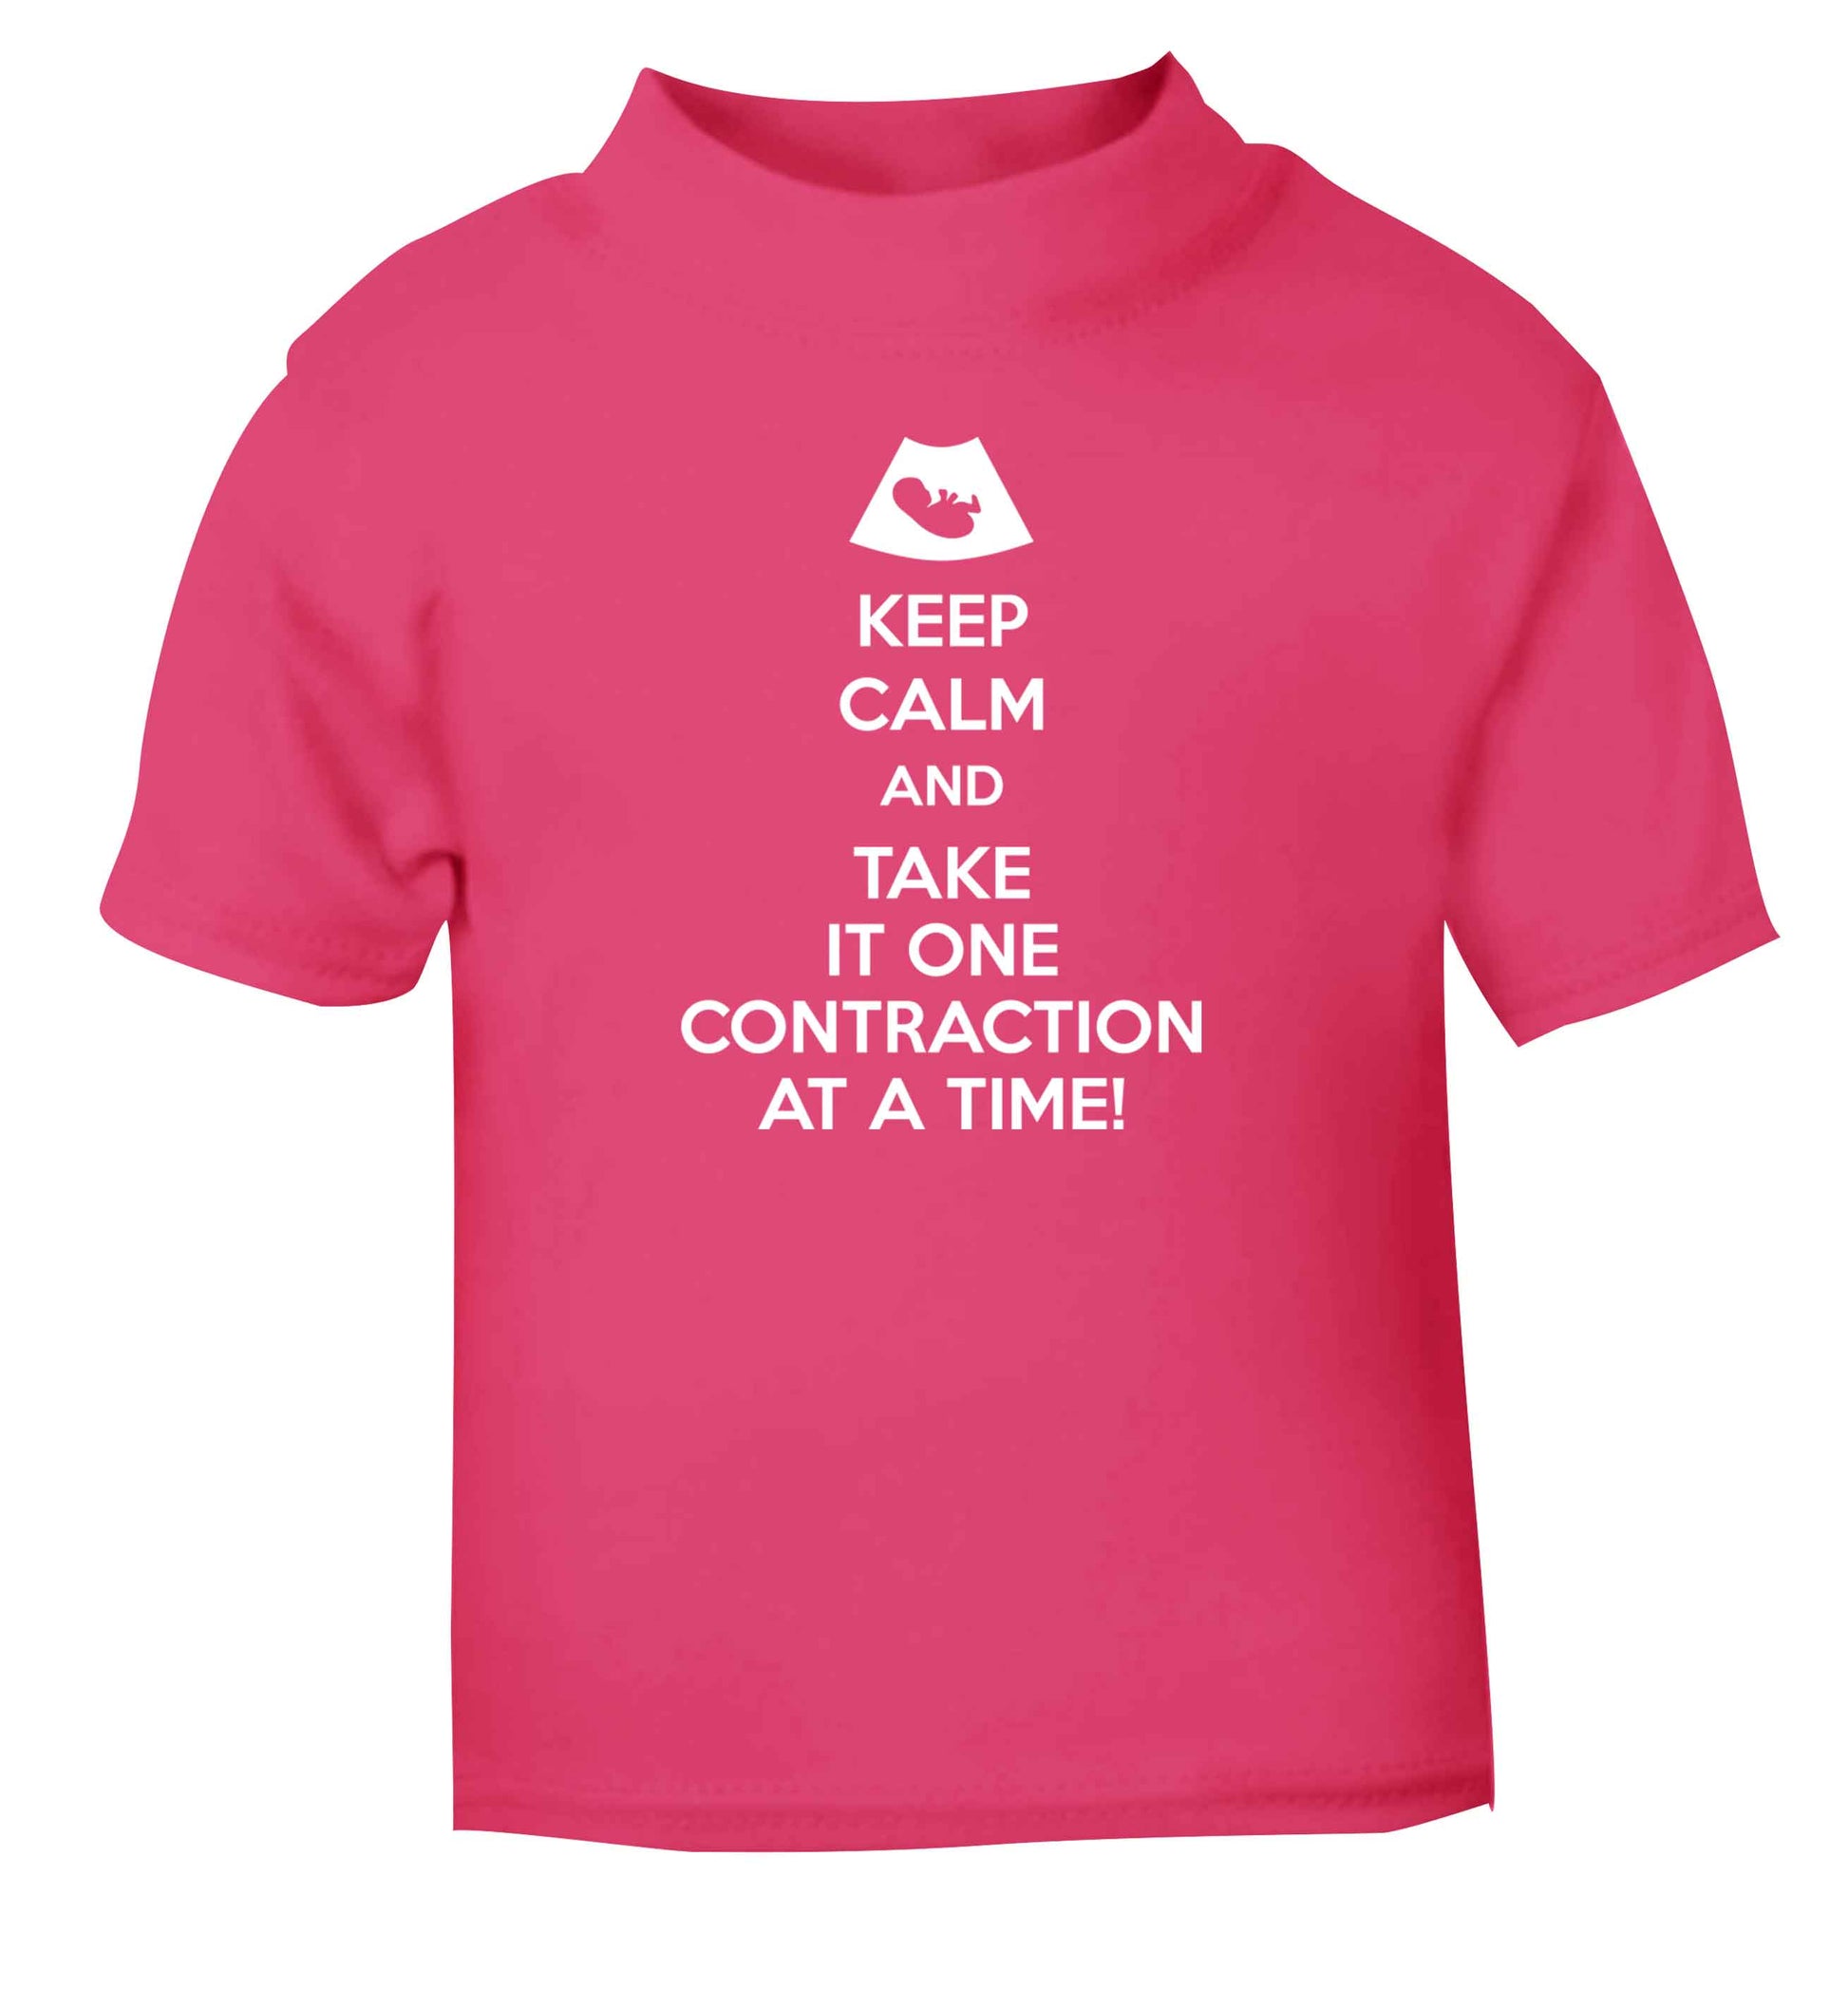 Keep calm and take it one contraction at a time pink Baby Toddler Tshirt 2 Years